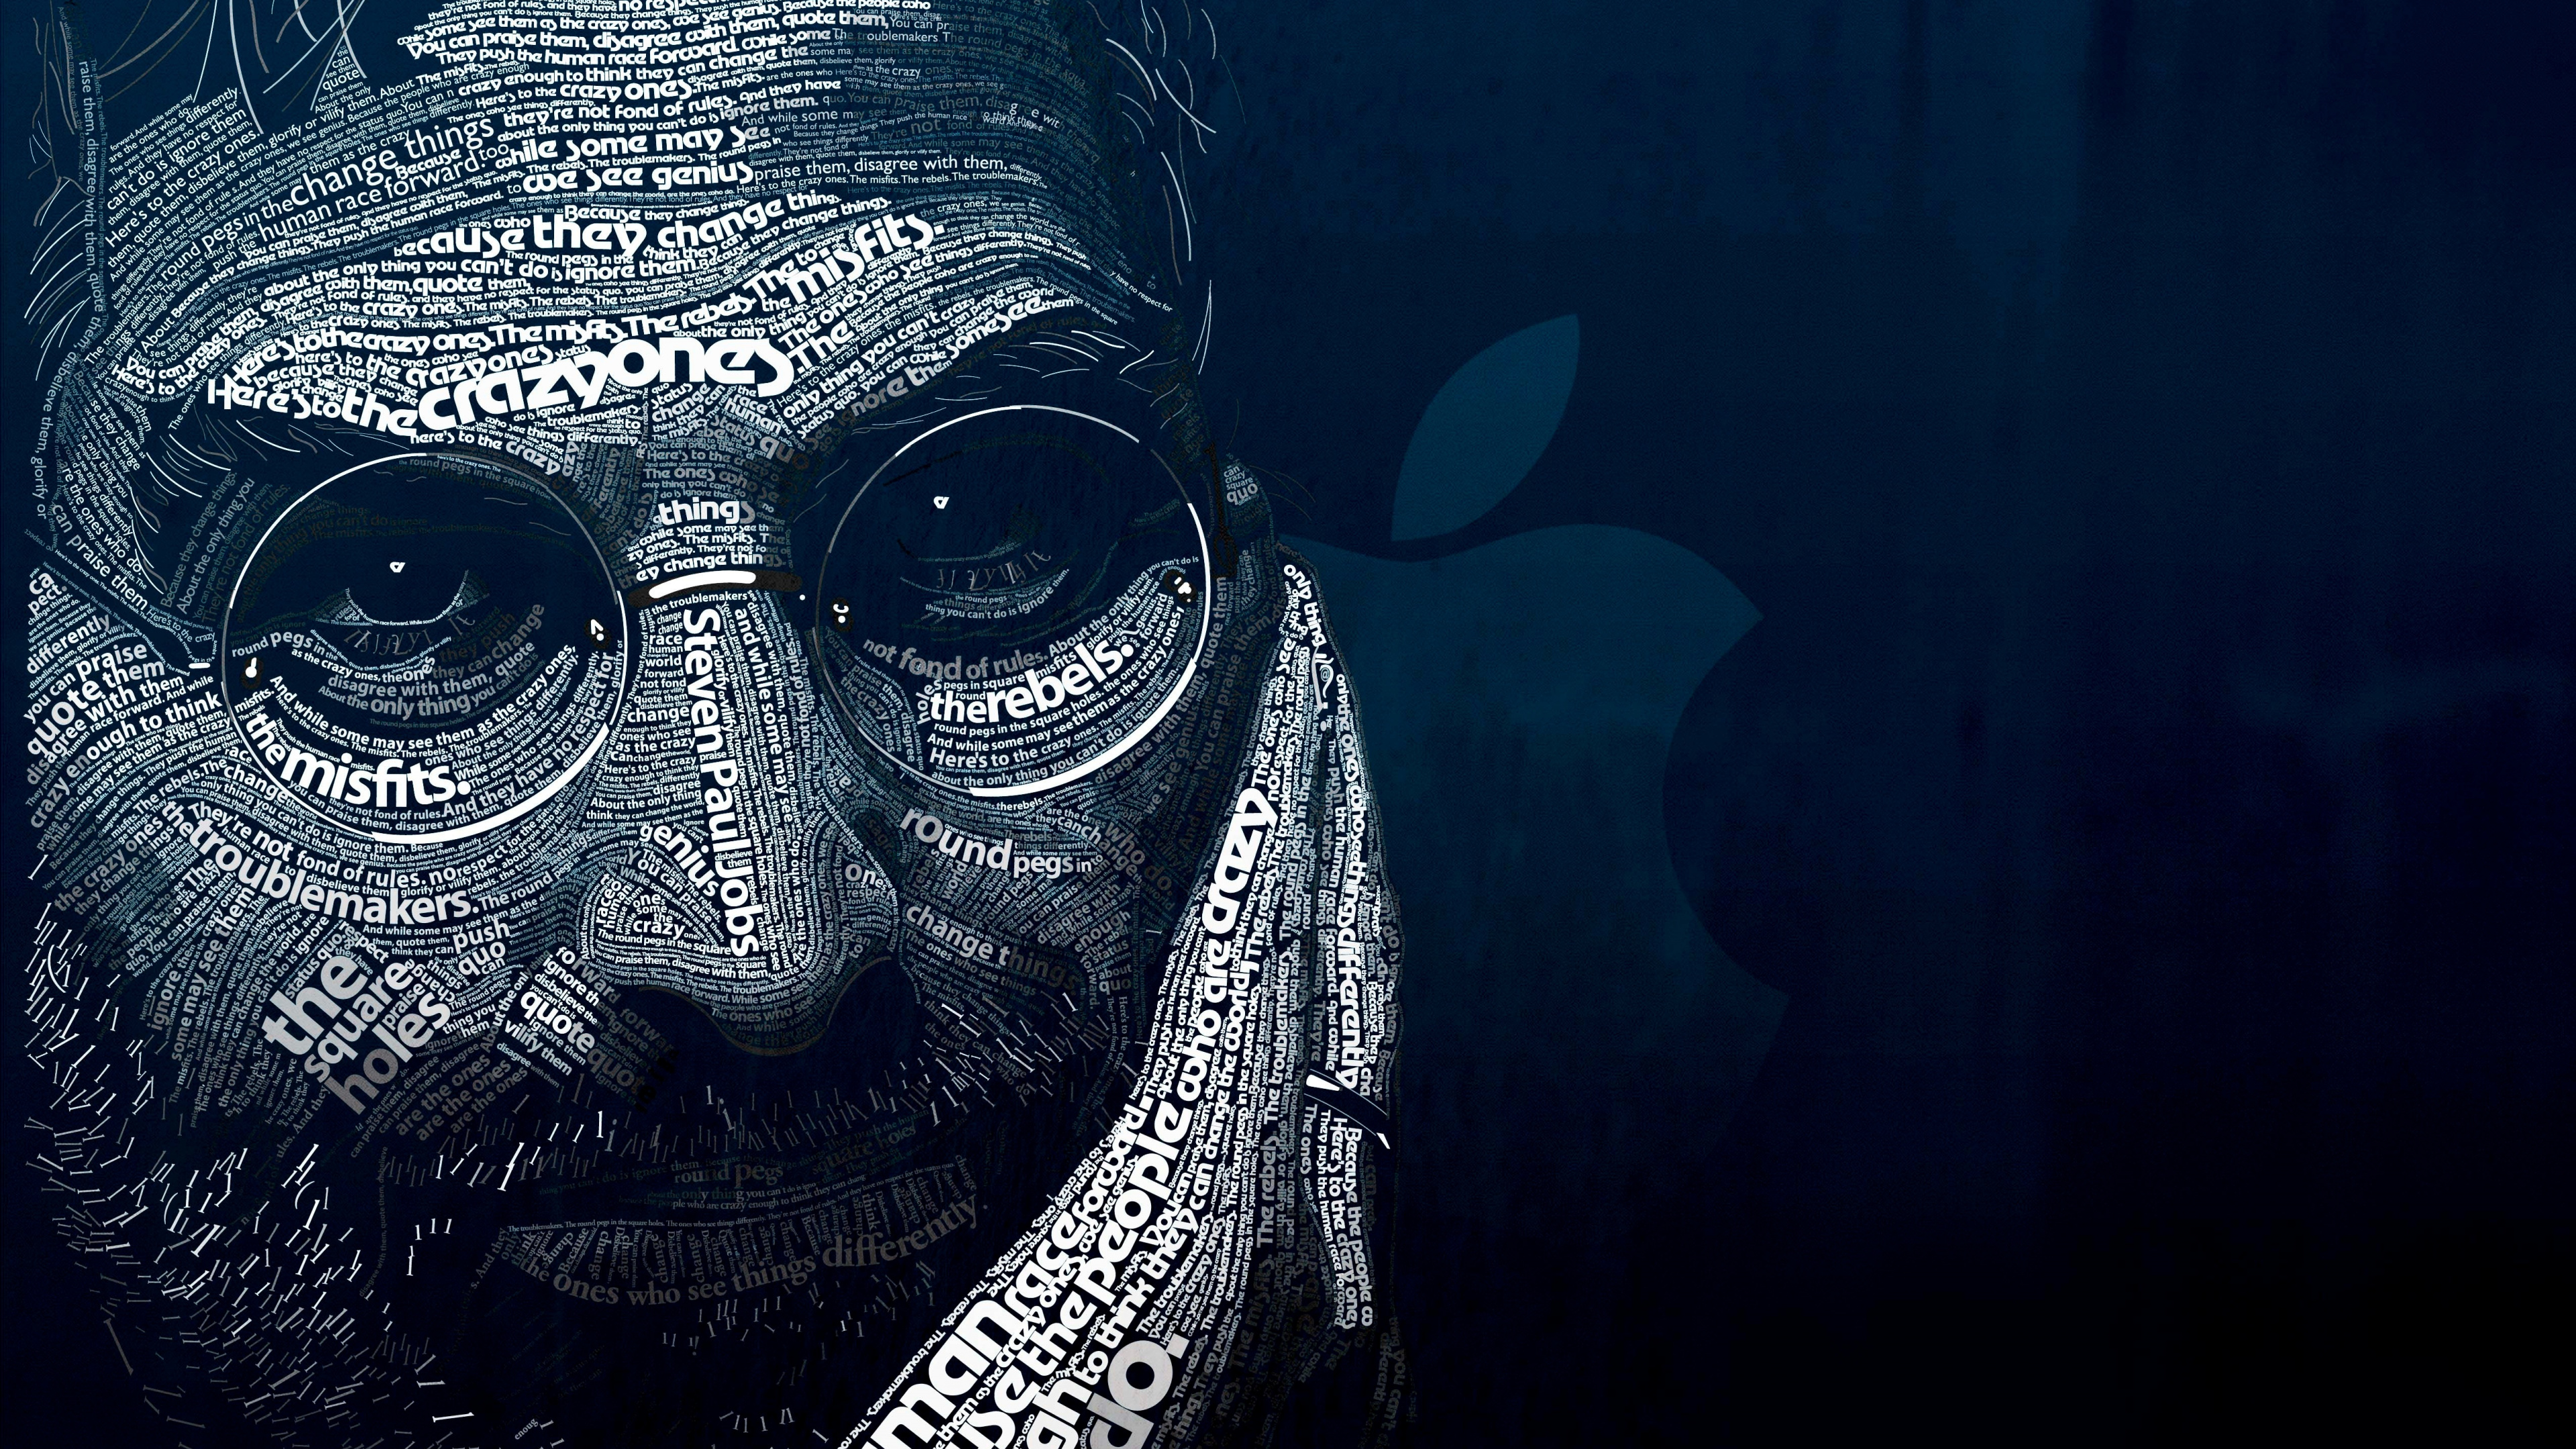 Steve Jobs, Obscurité, IPod, Masque, L'homme. Wallpaper in 3840x2160 Resolution